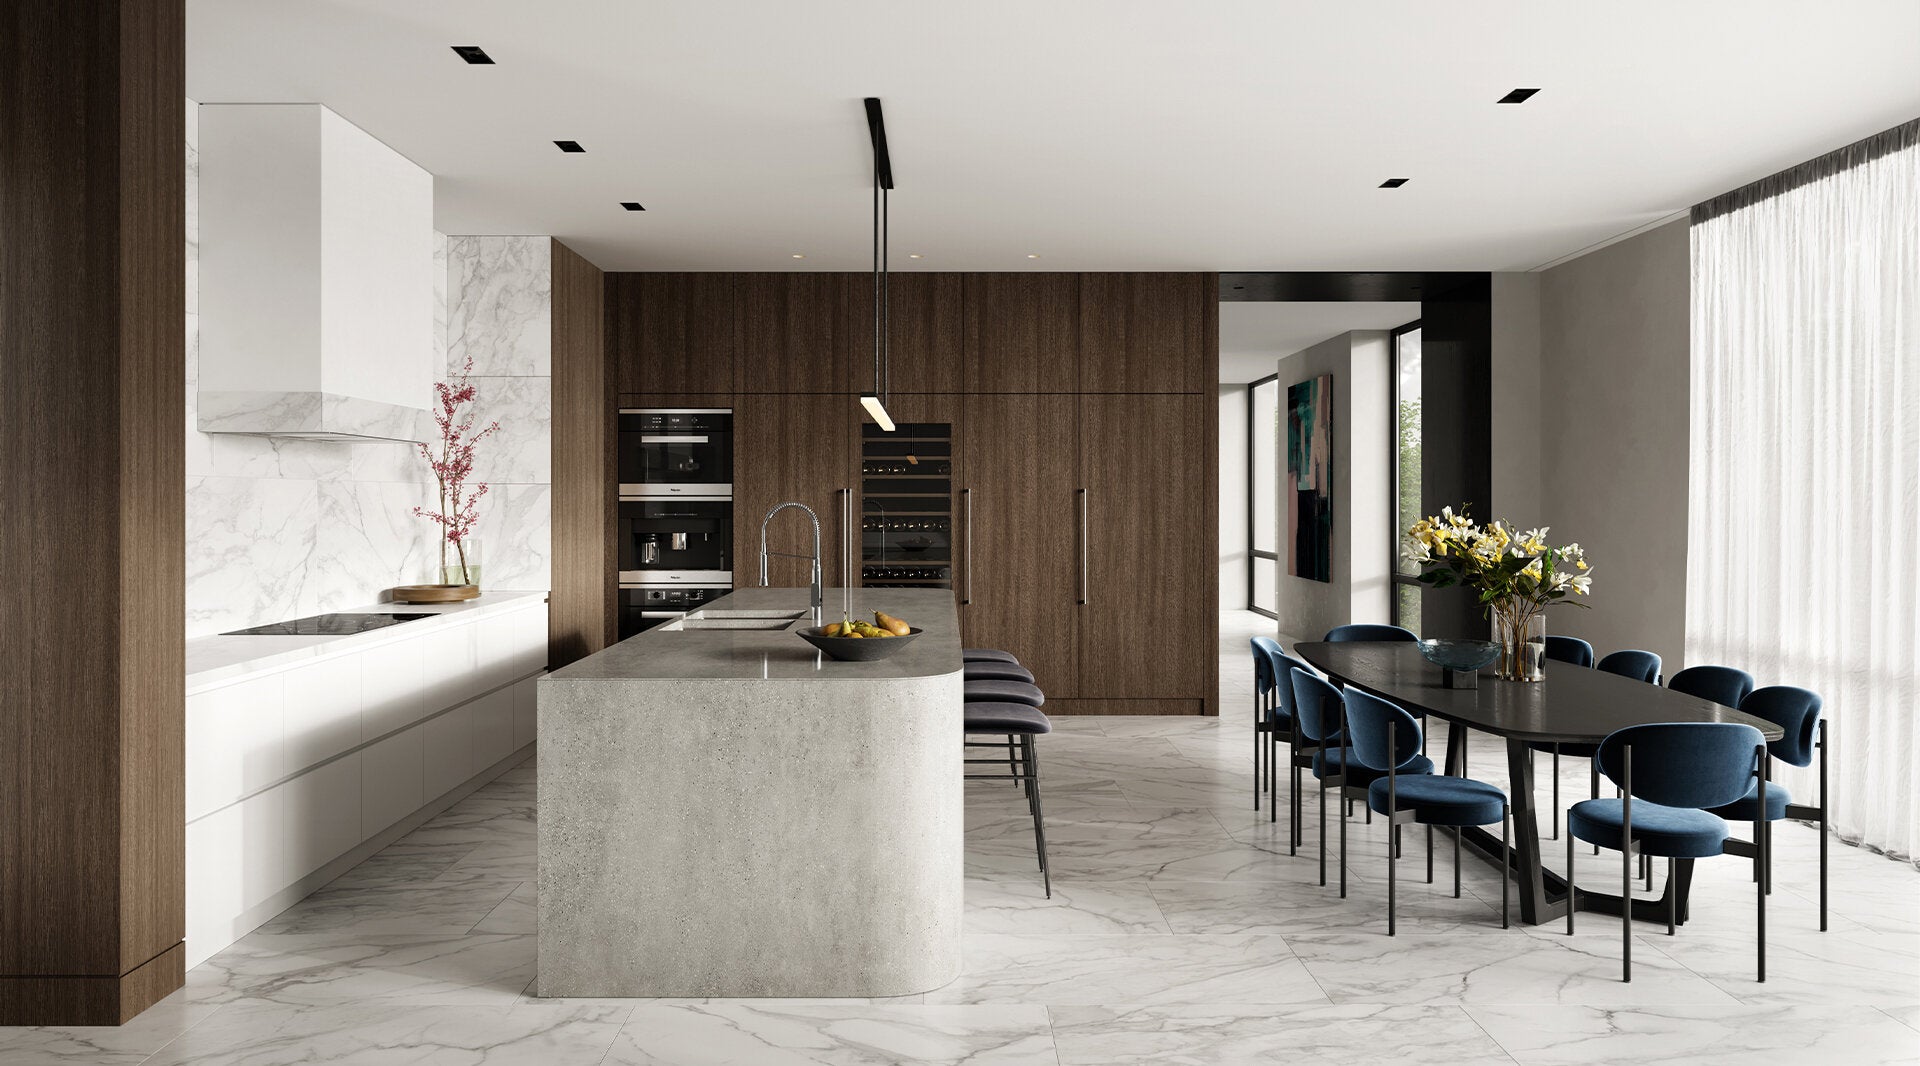 Elegant modern kitchen with Anatolia Plata porcelain tile flooring, featuring a central island, stainless steel appliances, and dark wood cabinetry.